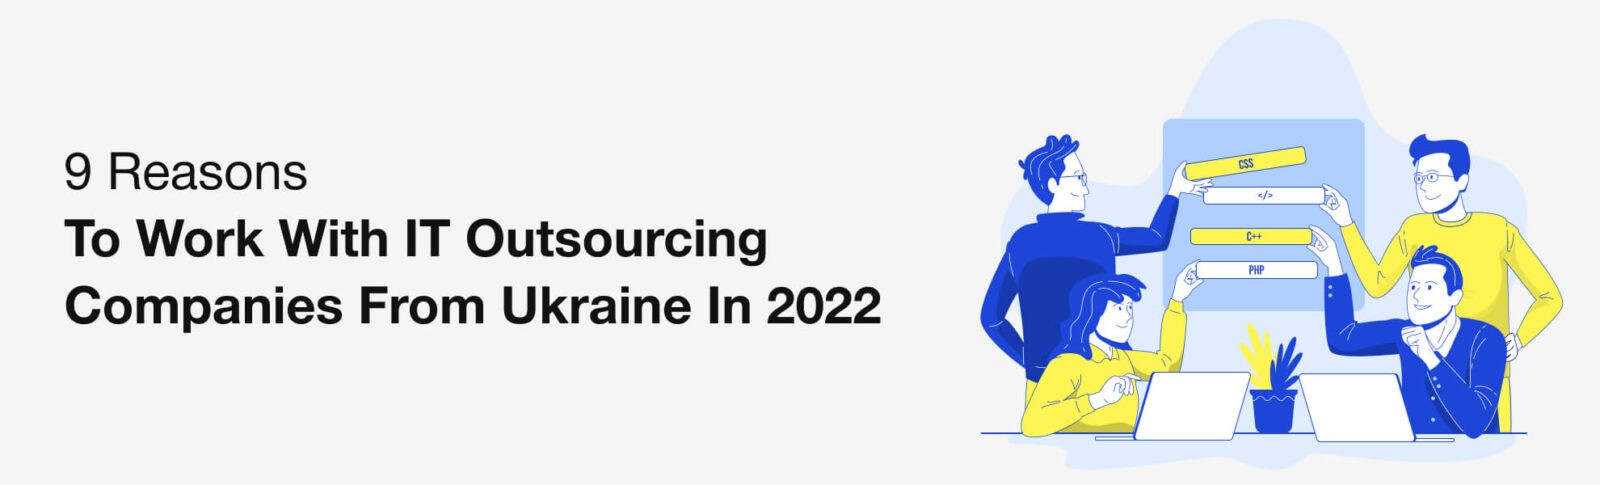 9 Reasons to Work With IT Outsourcing Companies From Ukraine in 2022